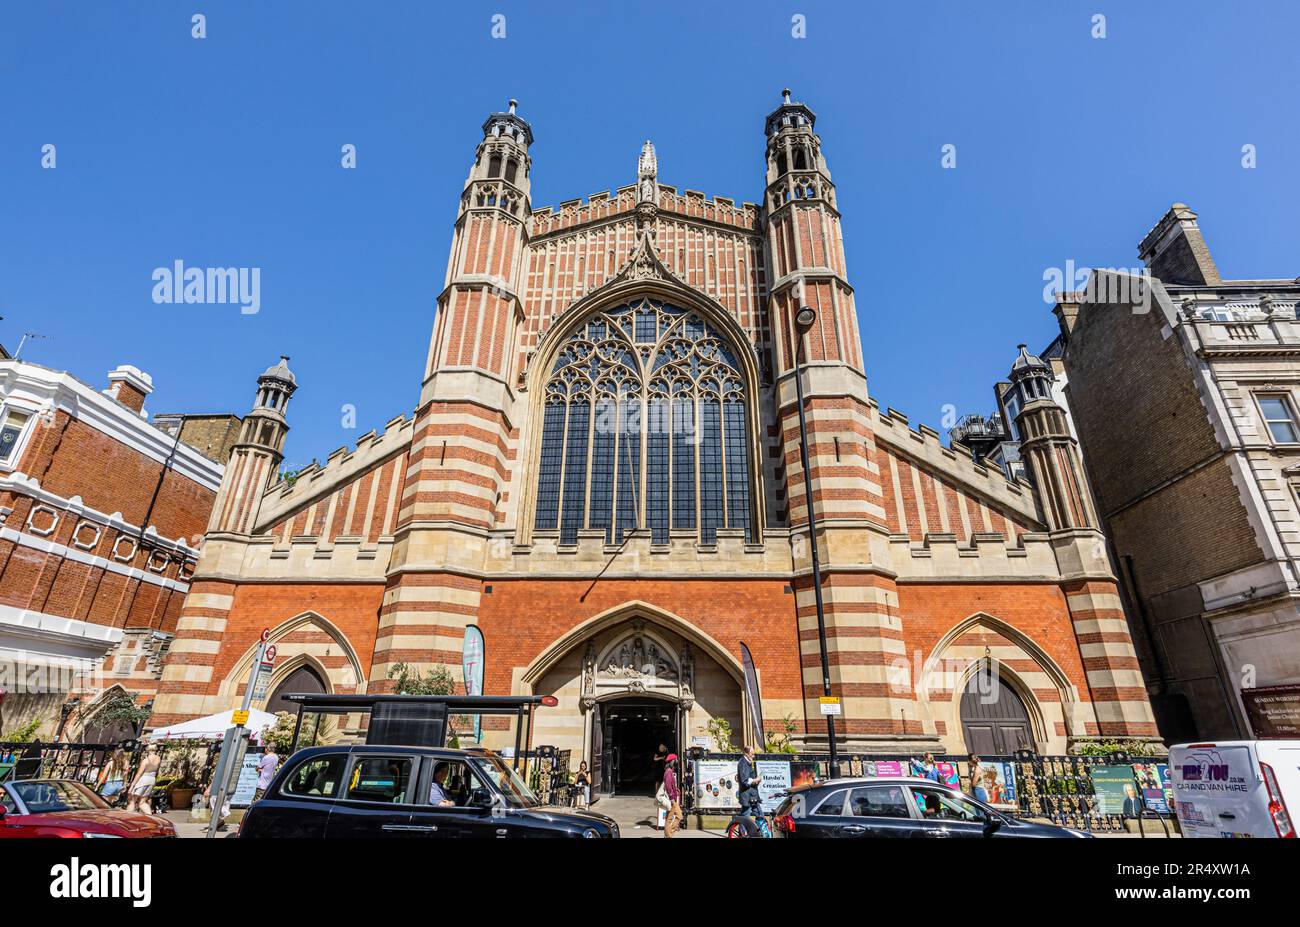 The front elevation of the iconic Gothic Revival architecture Holy Trinity Sloane Square church in Upper Chelsea, London SW1 on a sunny day, blue sky Stock Photo